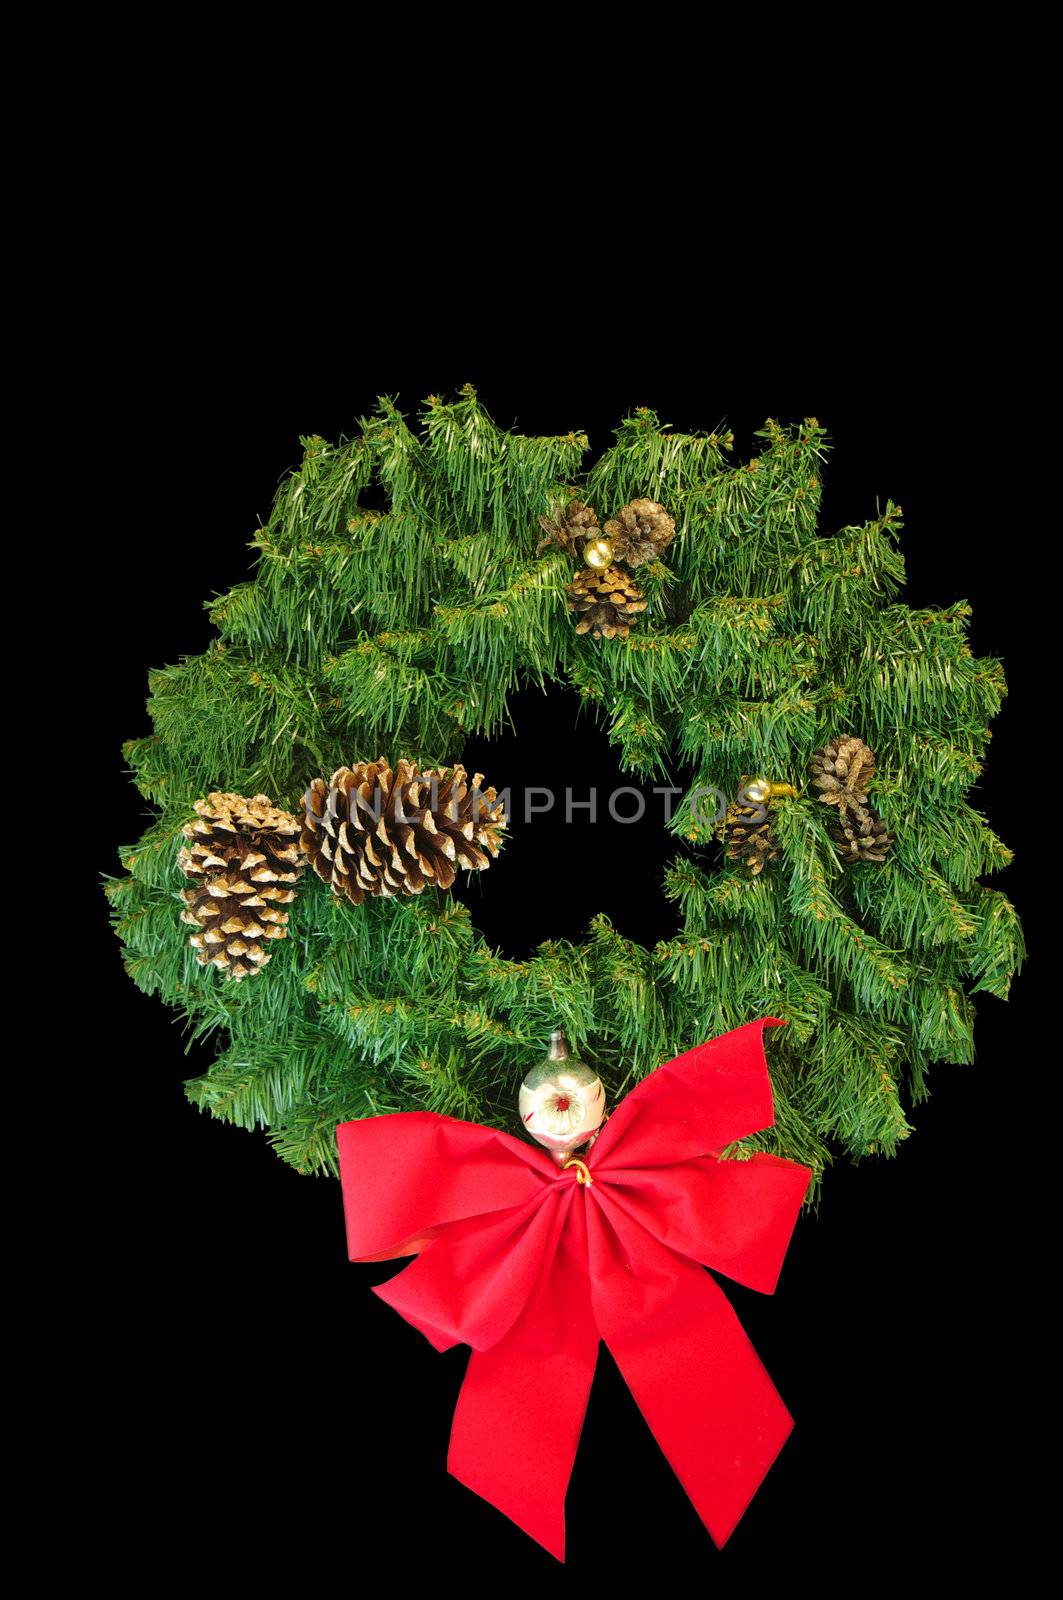 A Green Christmas wreath with a red bow